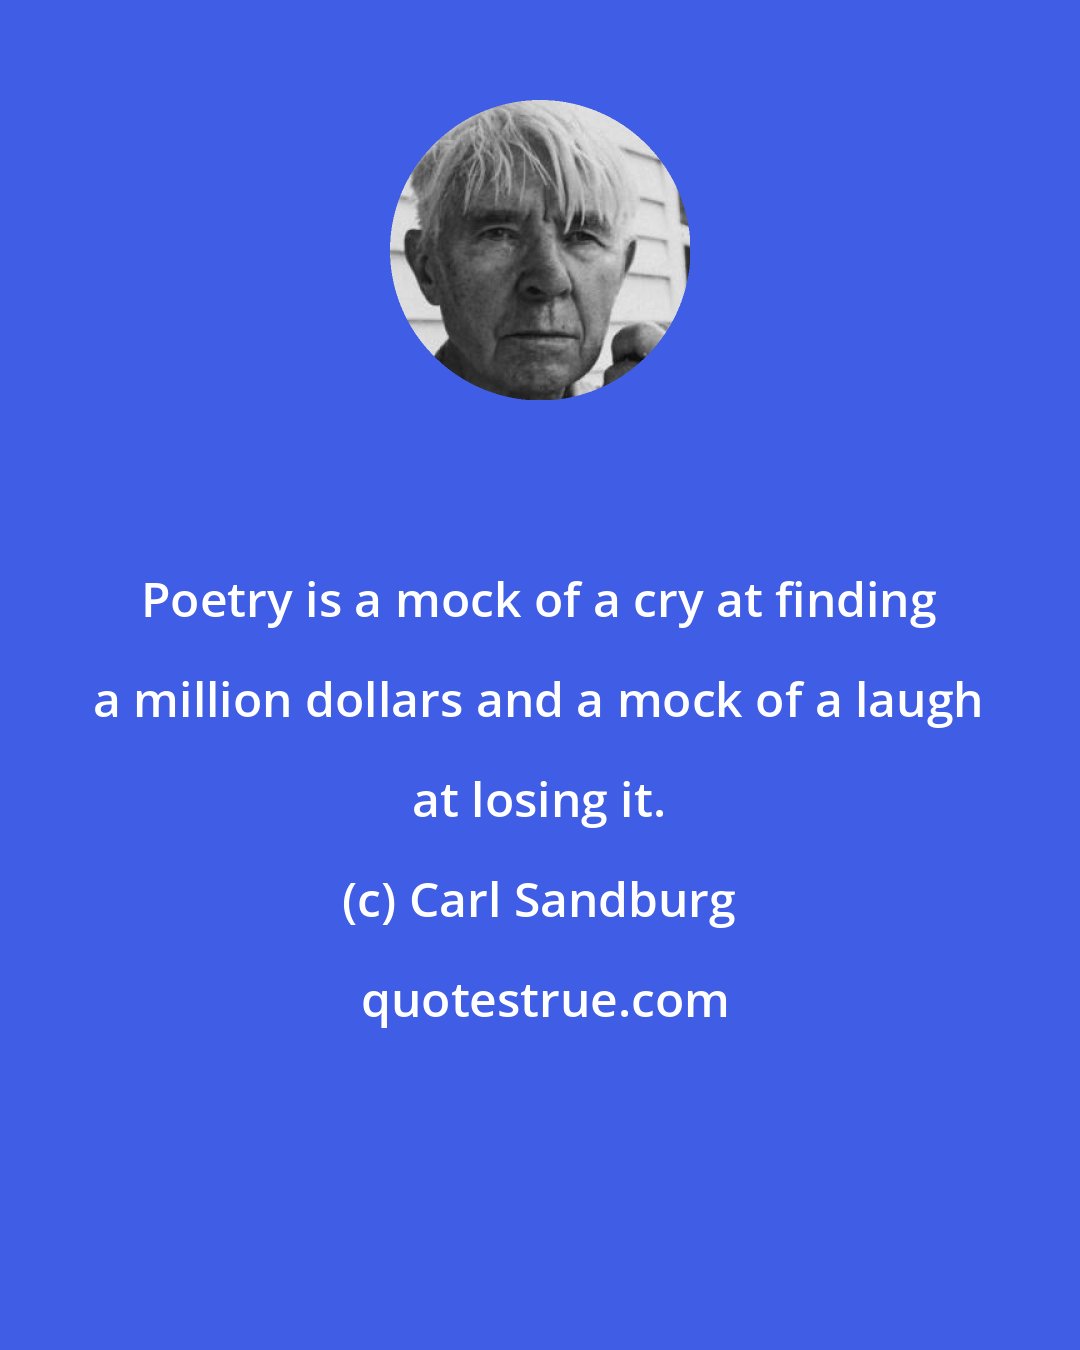 Carl Sandburg: Poetry is a mock of a cry at finding a million dollars and a mock of a laugh at losing it.